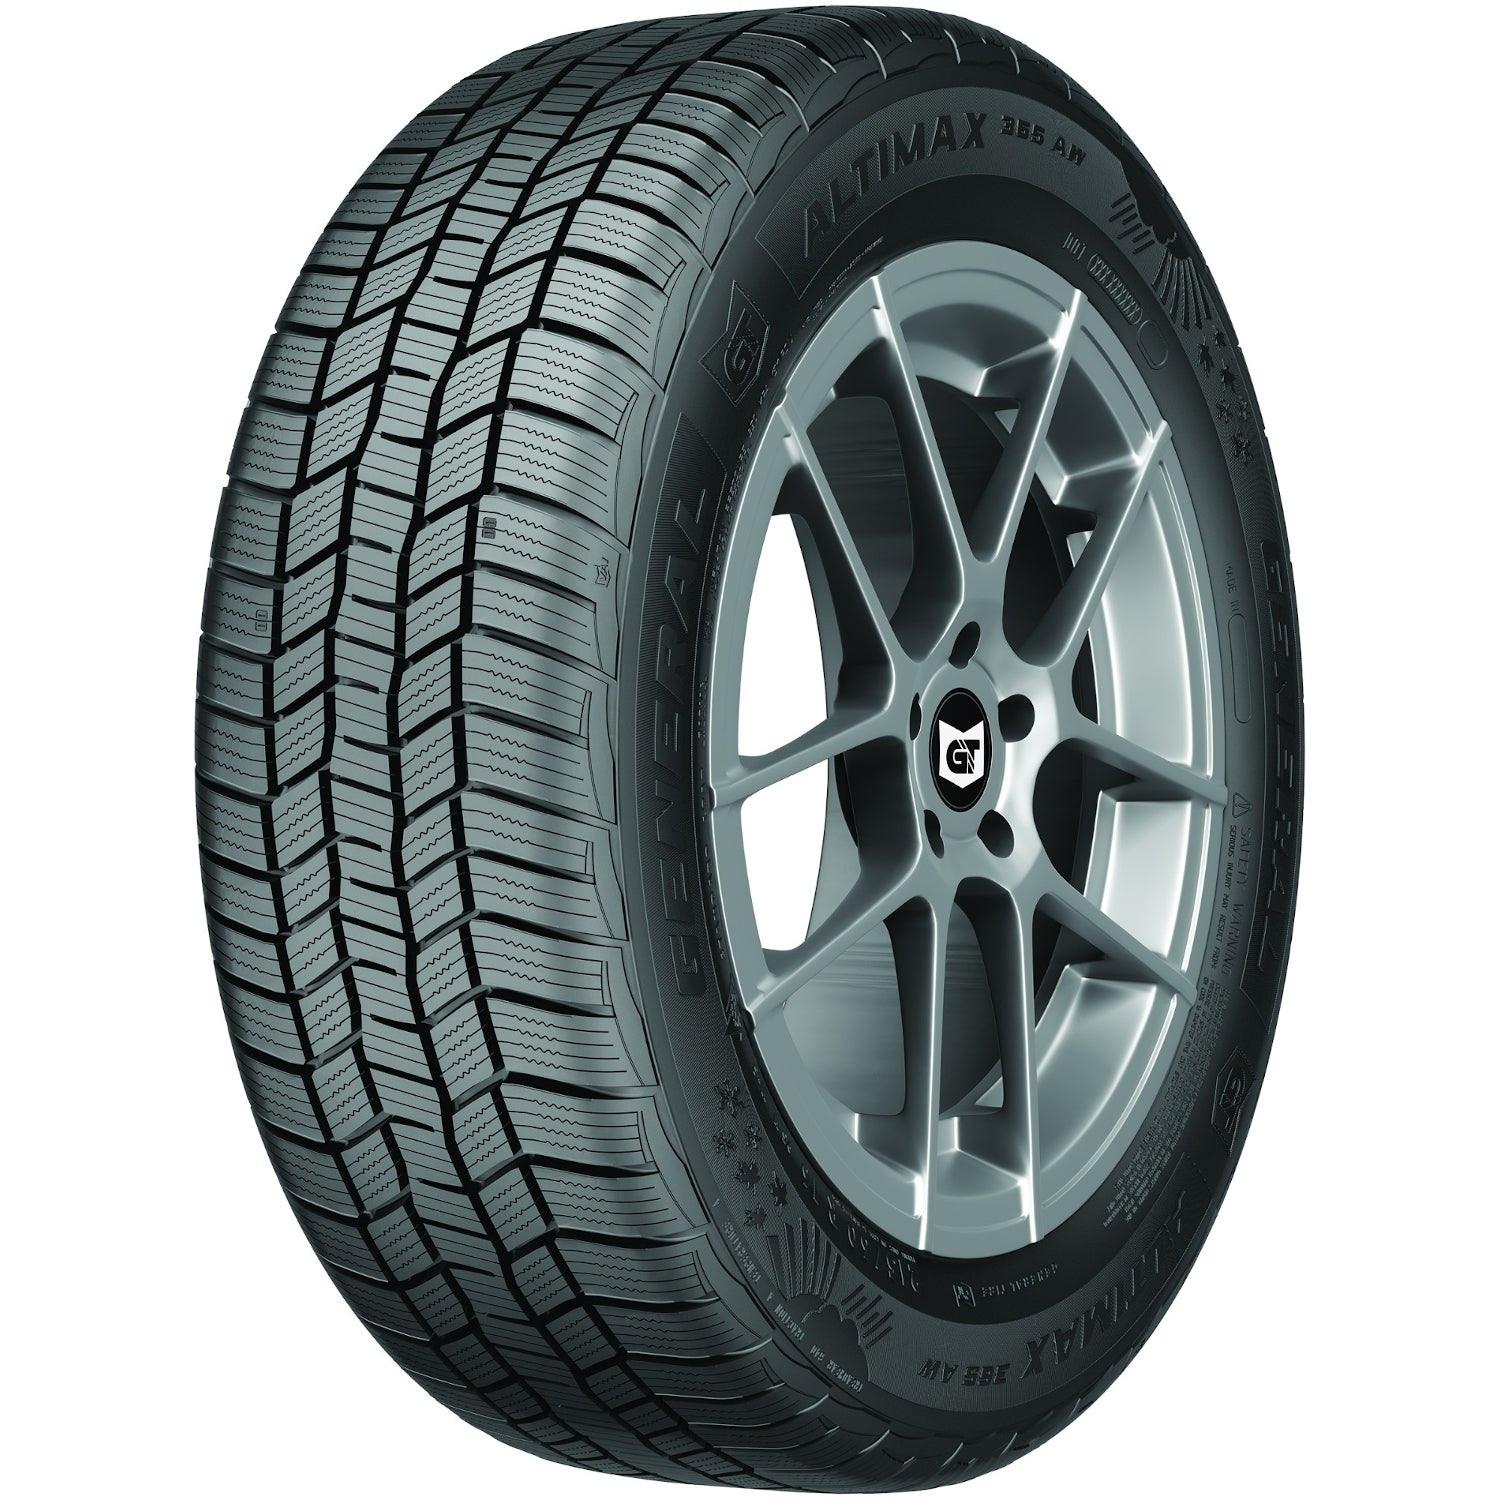 GENERAL ALTIMAX 365AW 195/65R15 (25X7.7R 15) Tires